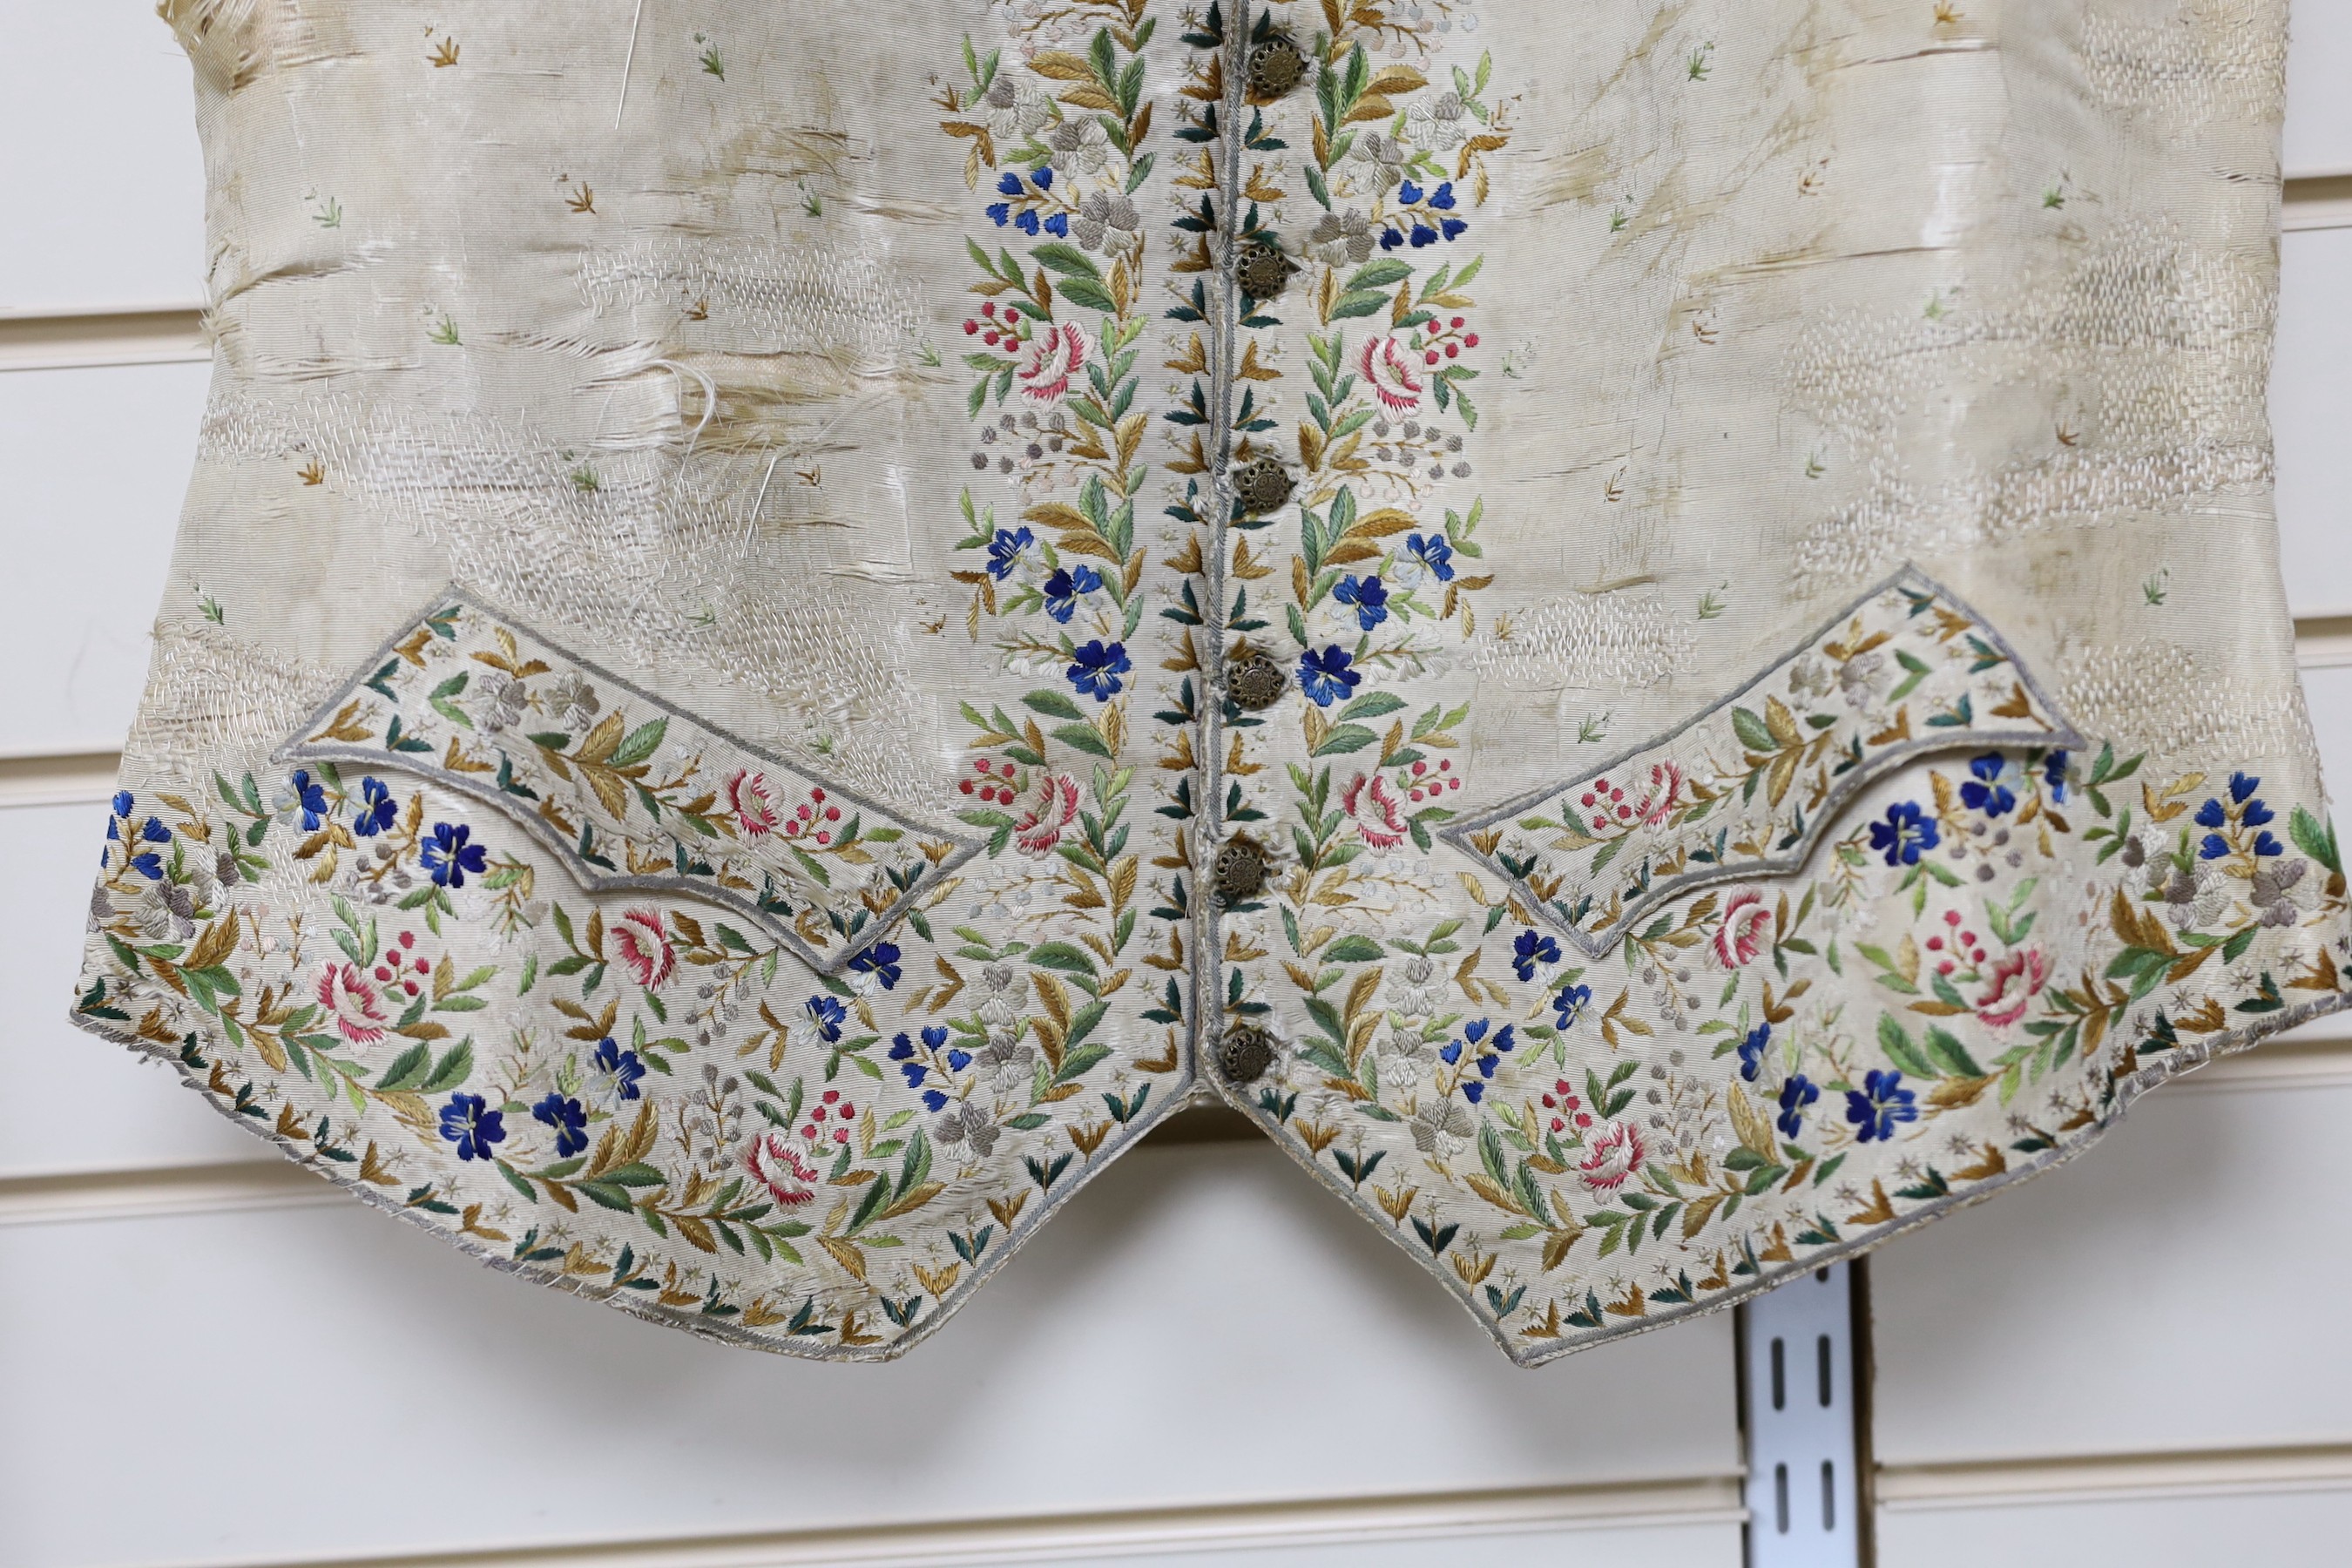 A late 18th early 19th century gentleman’s cream silk waistcoat Embroidered with polychrome silks in - Image 4 of 4